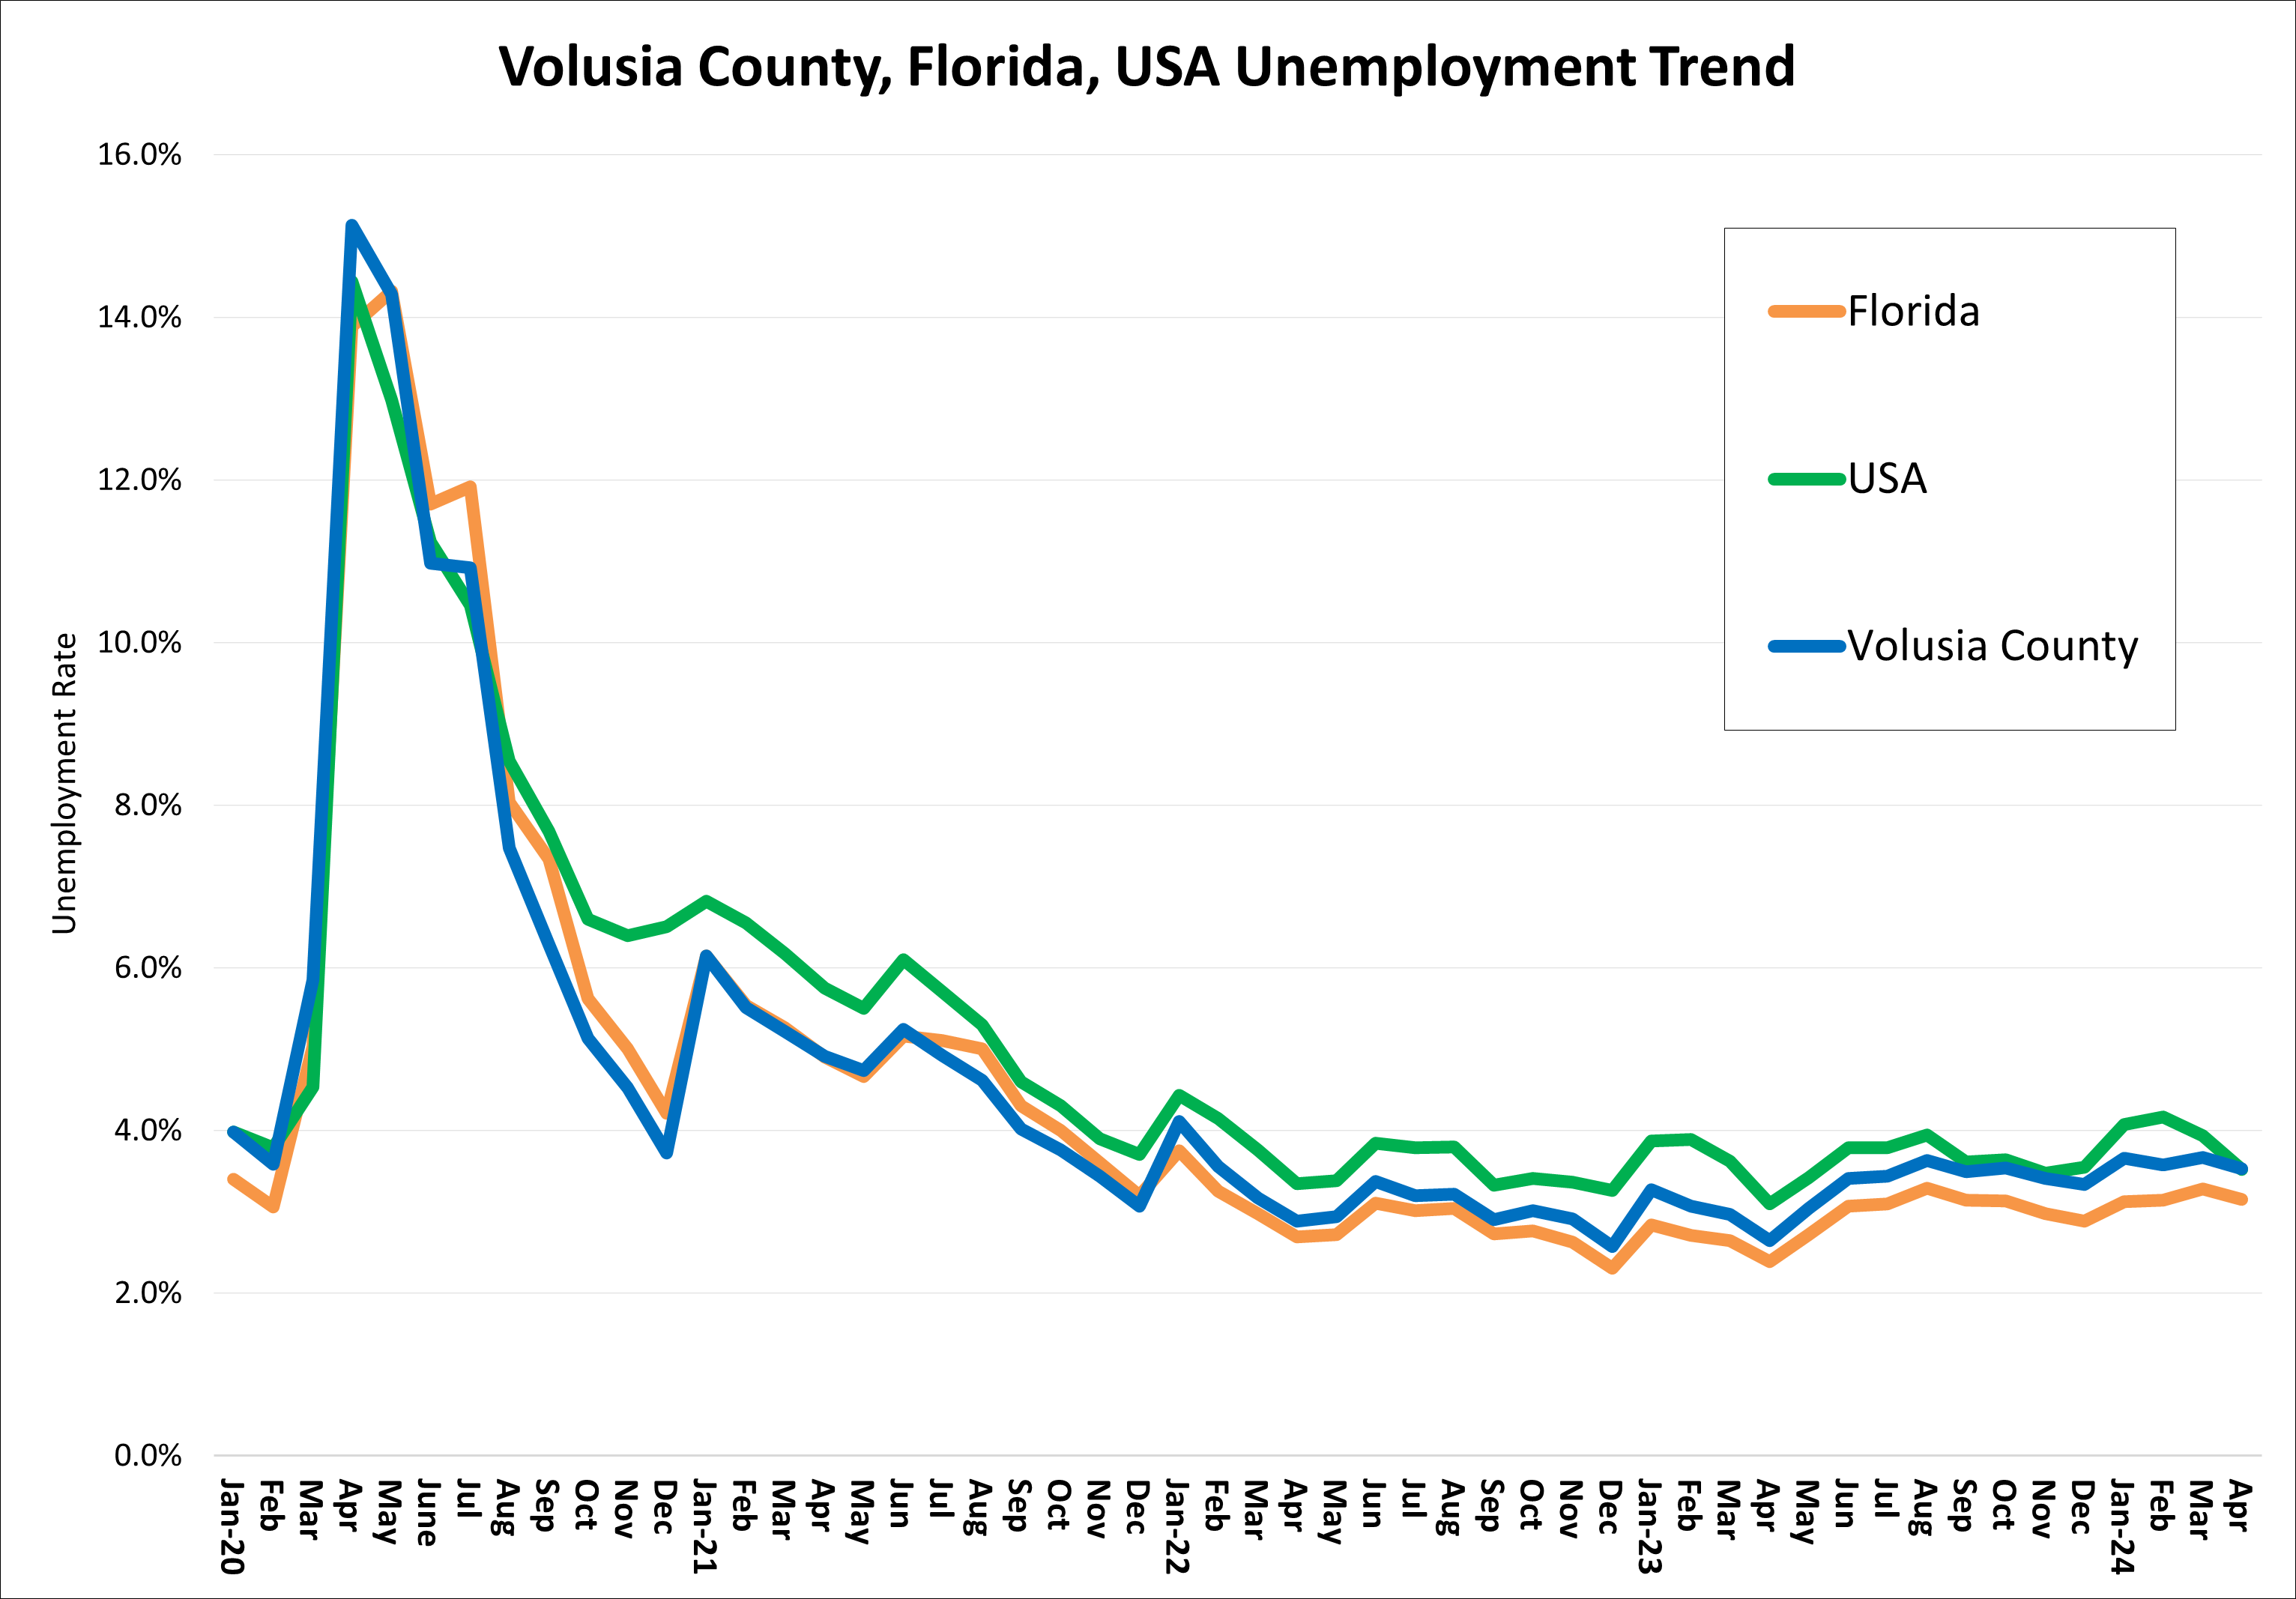 The chart shows the unemployment rate trend for Volusia County, Florida, and the US from January 2020 to present. After the impact of COVID and an initial rate of 15.1%, Volusia County's unemployment rate had a steady decrease throughout 2021 and 2022. The current rate was 3.7% as of March 2024 and has consistently been lower than the national unemployment rate. Florida's unemployment rate was 3.3% and the US was 3.9%.